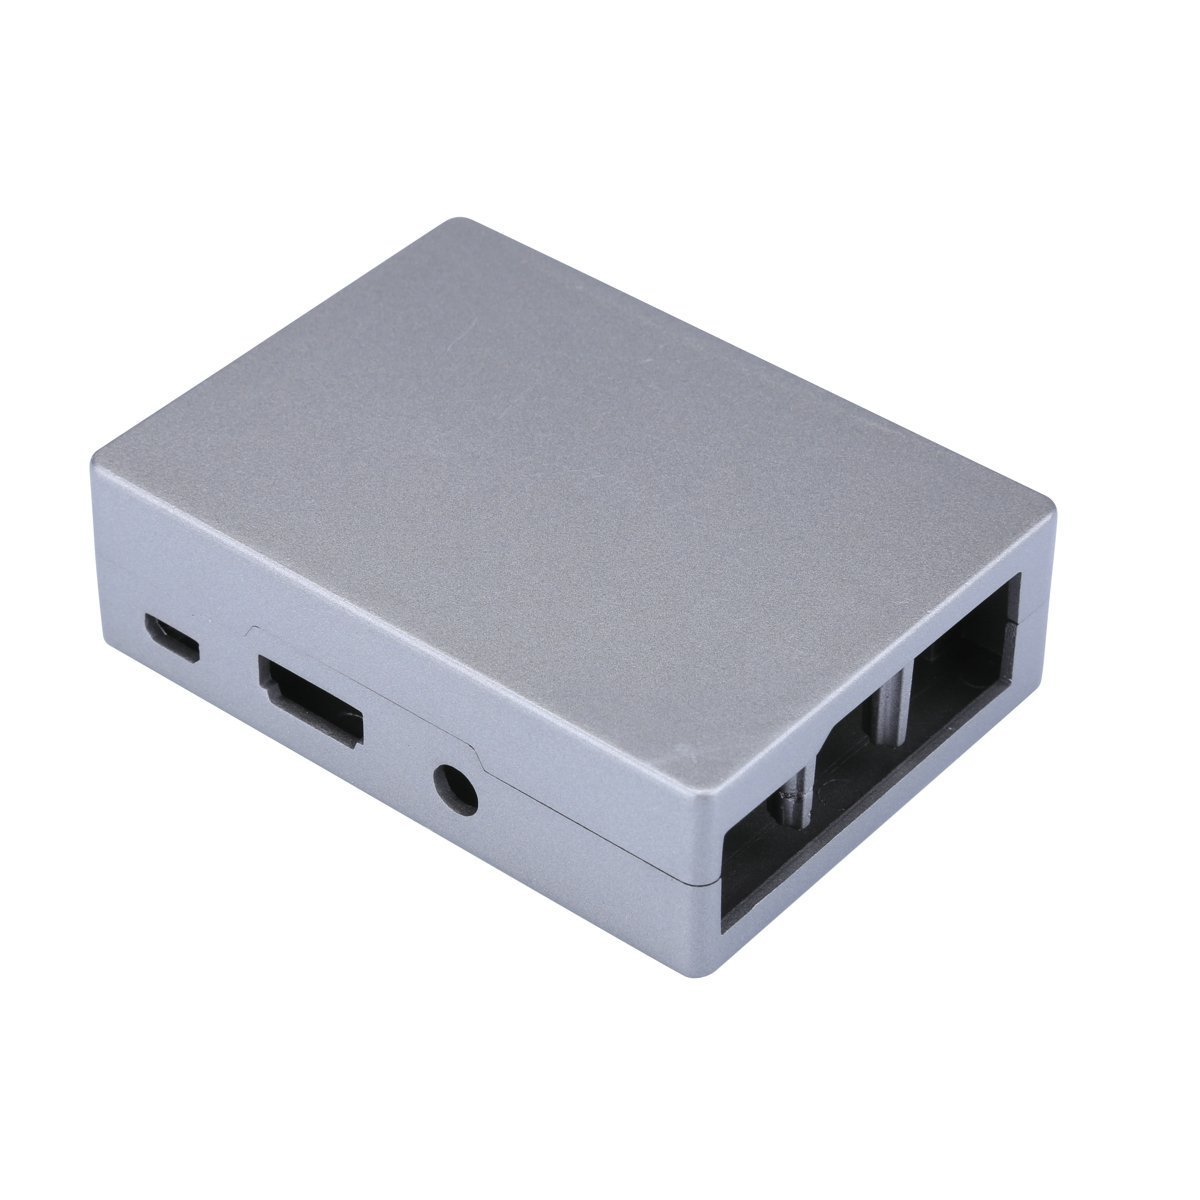 REES52 Raspberry Pi 3 Aluminum Case Silver Case Compatible with Raspberry Pi 2 Model B plus (Silver)